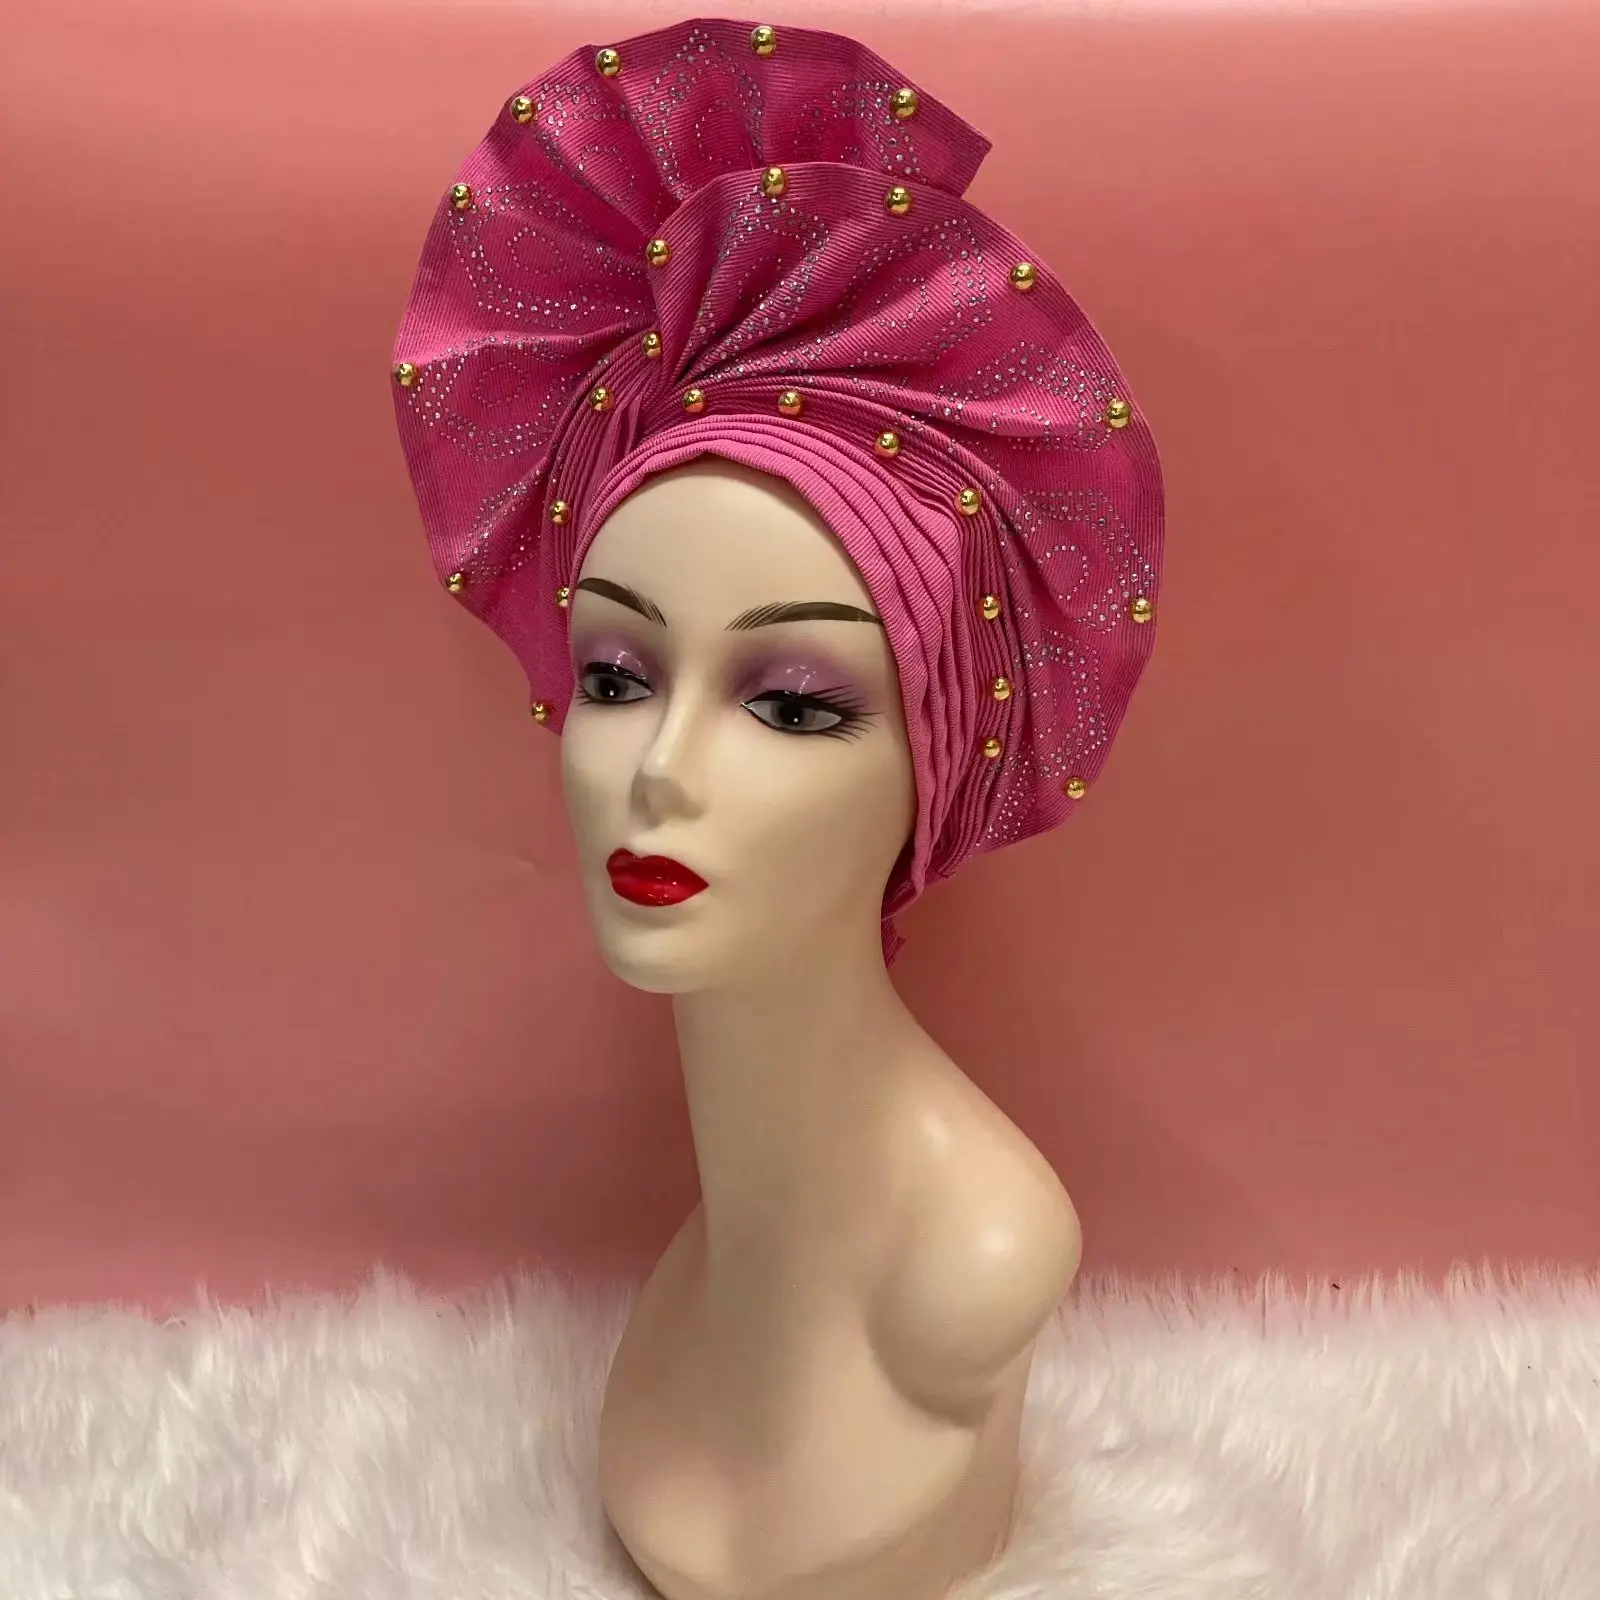 Gold Newest African Turban Cap With Beads On Top Nigeria Head Wrap Women Cap Nigerian Auto Gele Already Made Best Selling 1Set